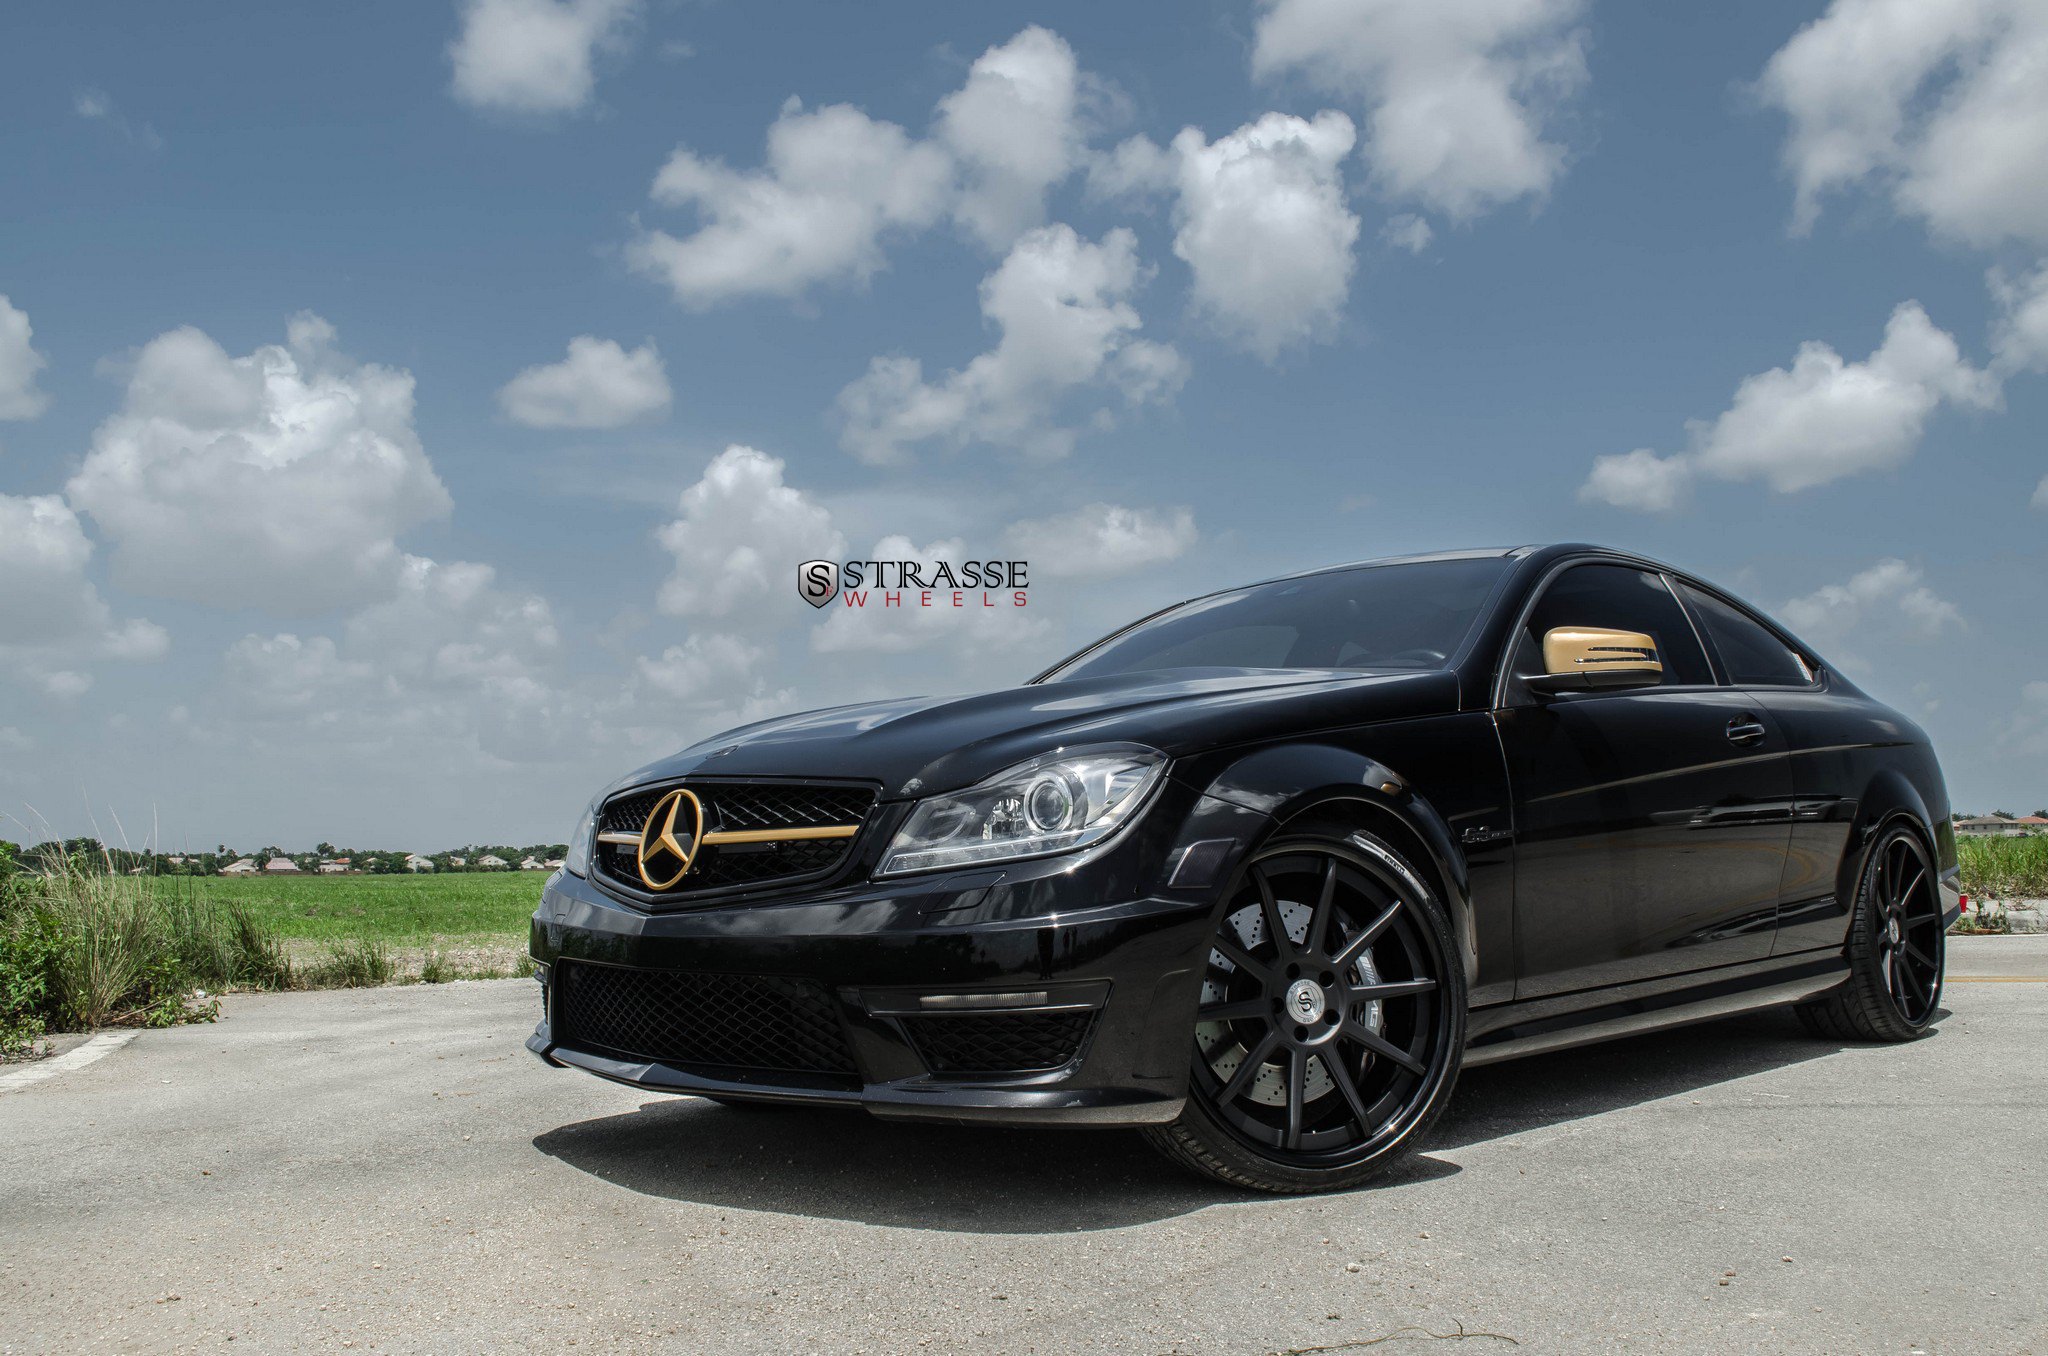 Crystal Clear Headlights on Black Mercedes C-Class - Photo by Strasse Forged